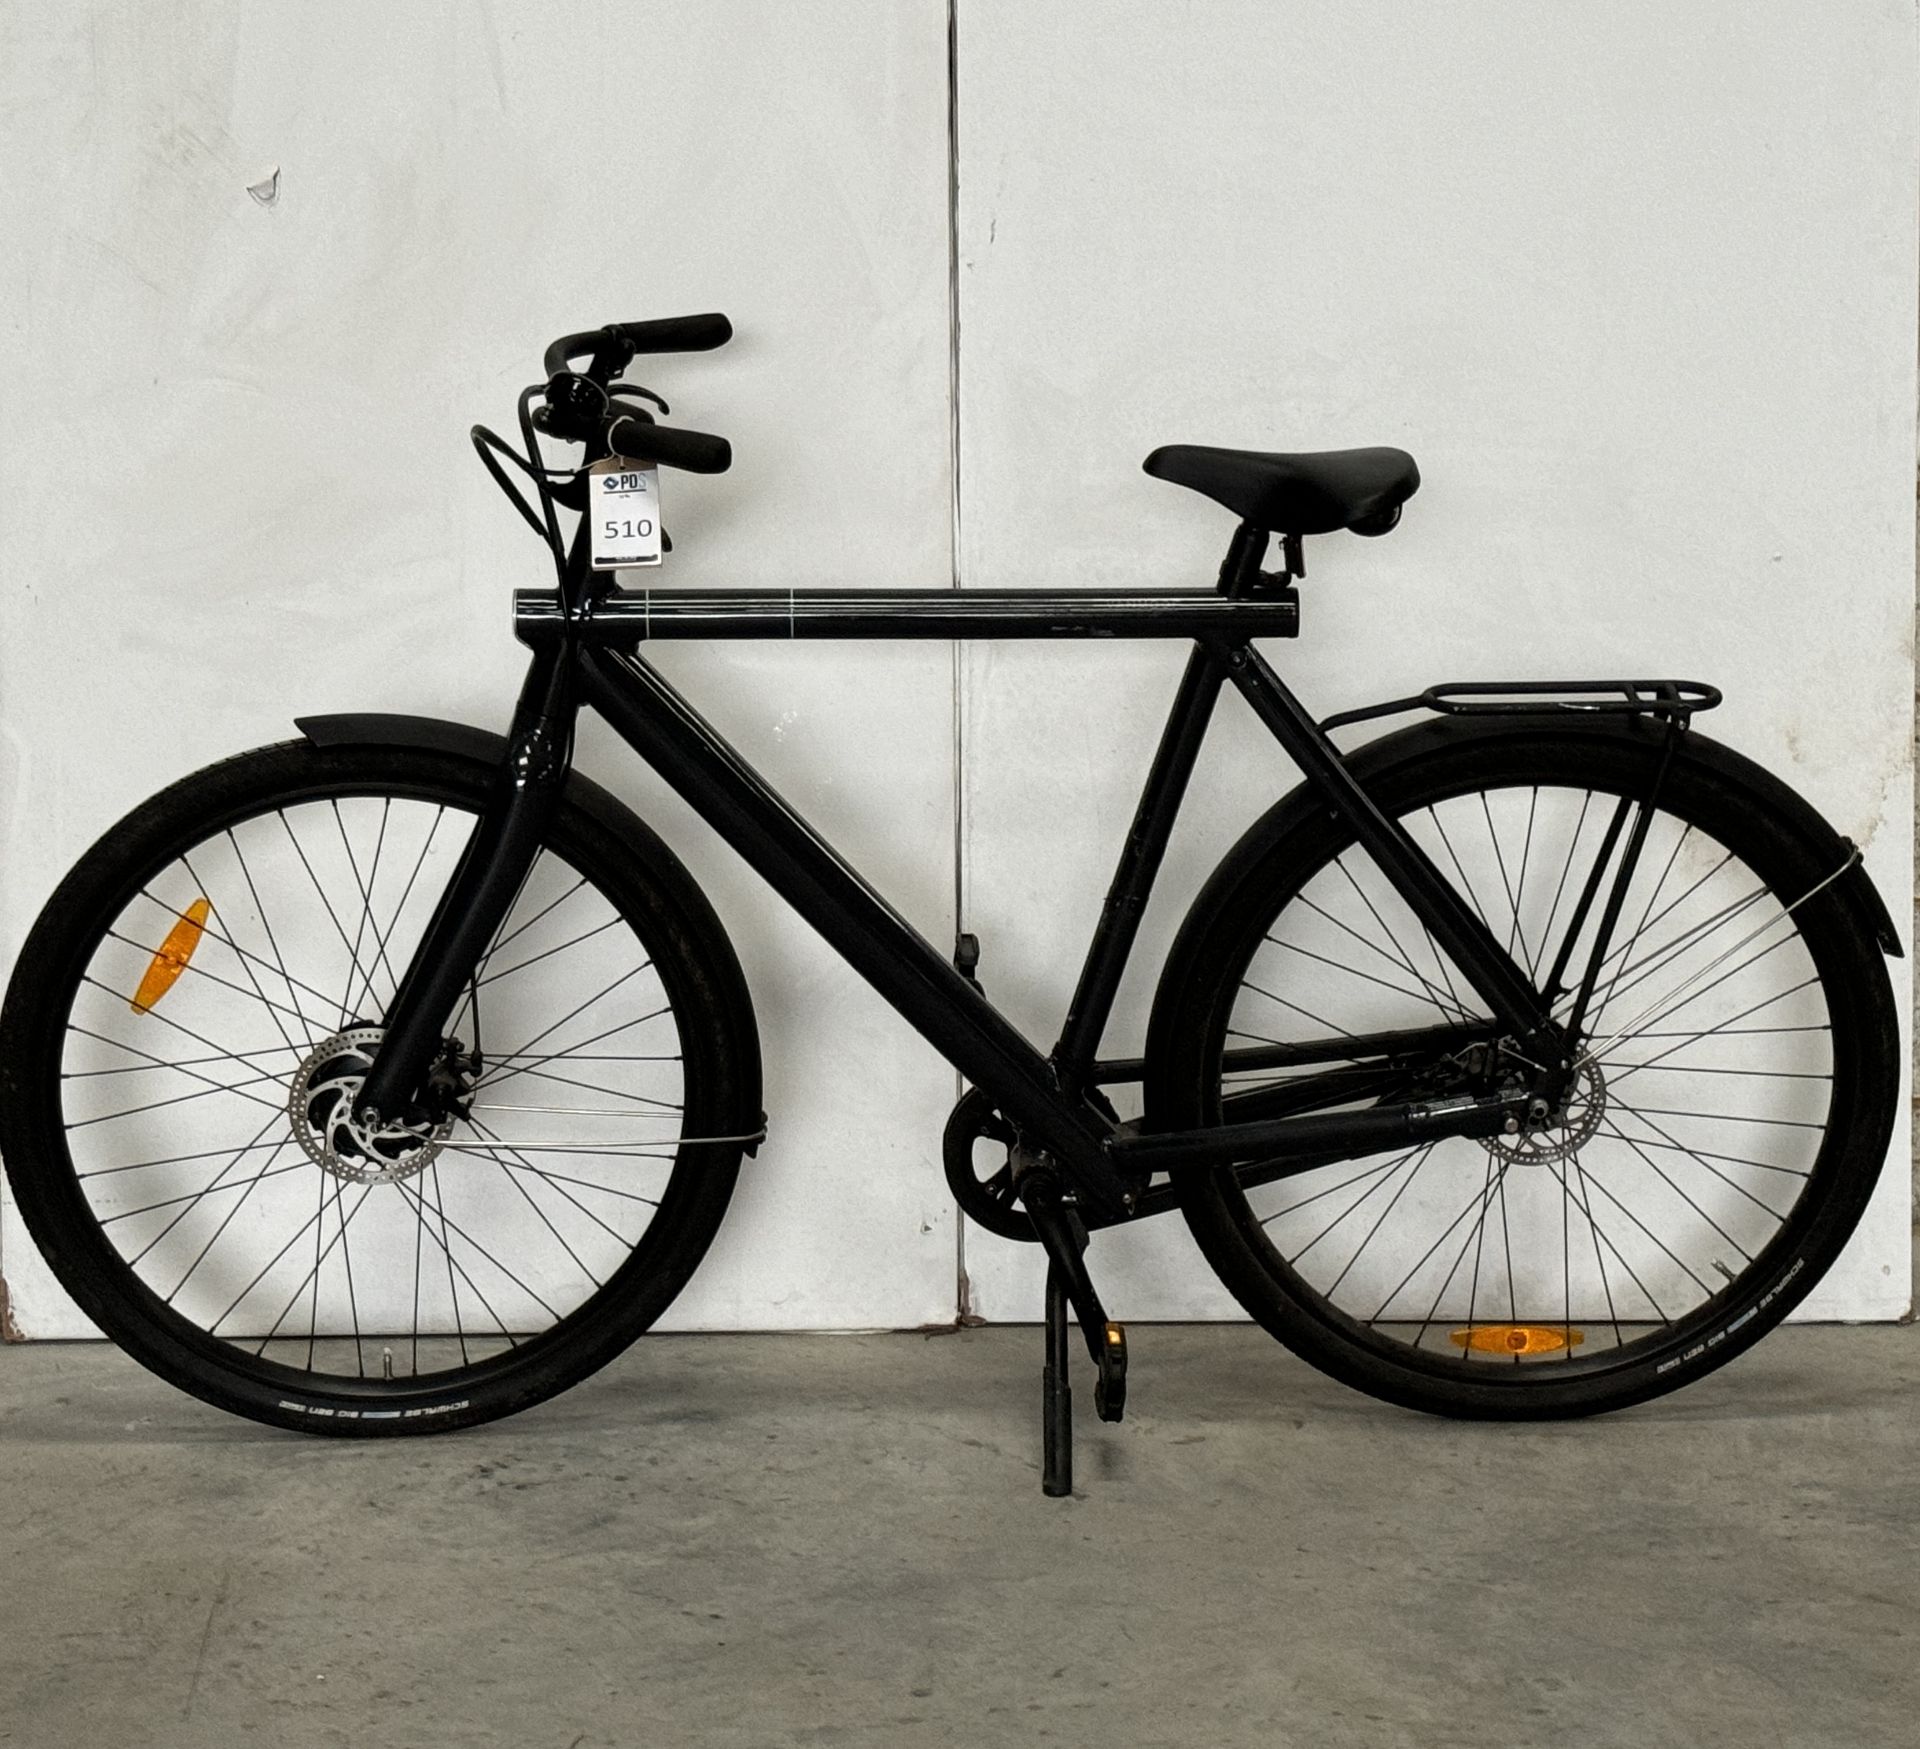 VanMoof Electric Bike, Frame Number AST8812776 (NOT ROADWORTHY - FOR SPARES ONLY) (No codes